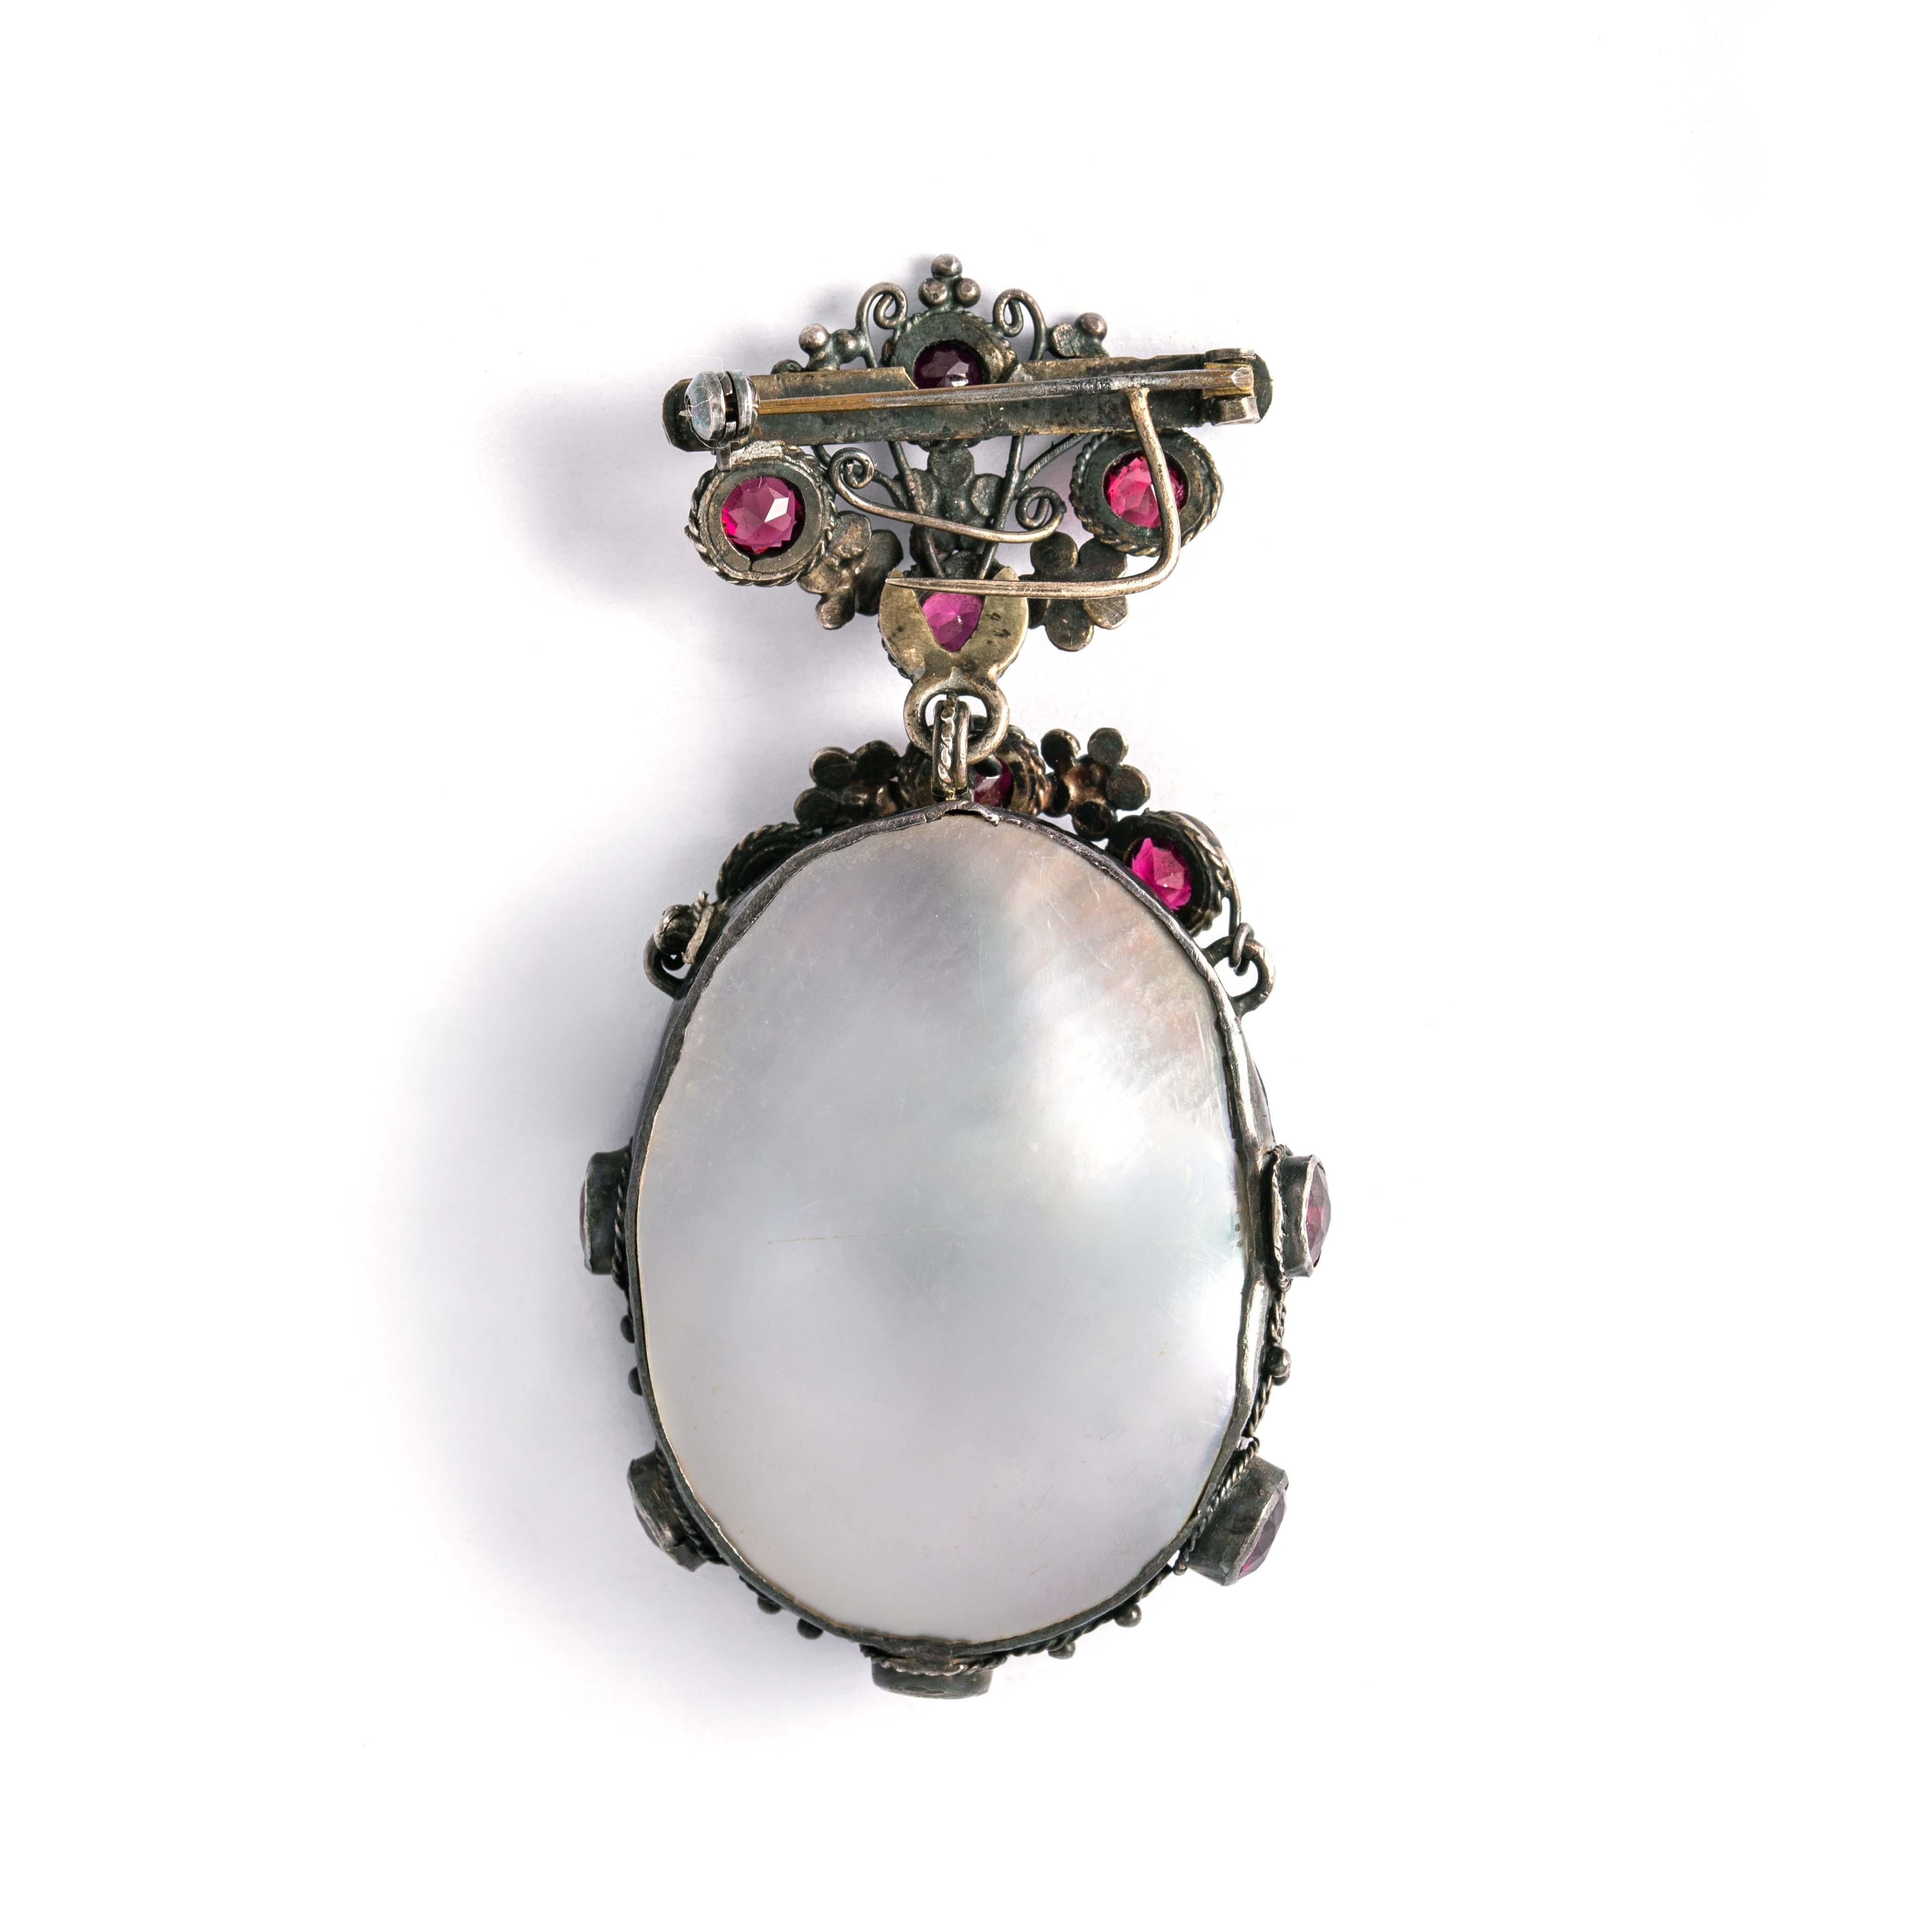 Antique Silver brooch set with red stones and holding a double-sided mother-of-pearl design.
Dimensions: 7.00 x 3.50 centimeters. 
Gross weight: 26.72 grams.